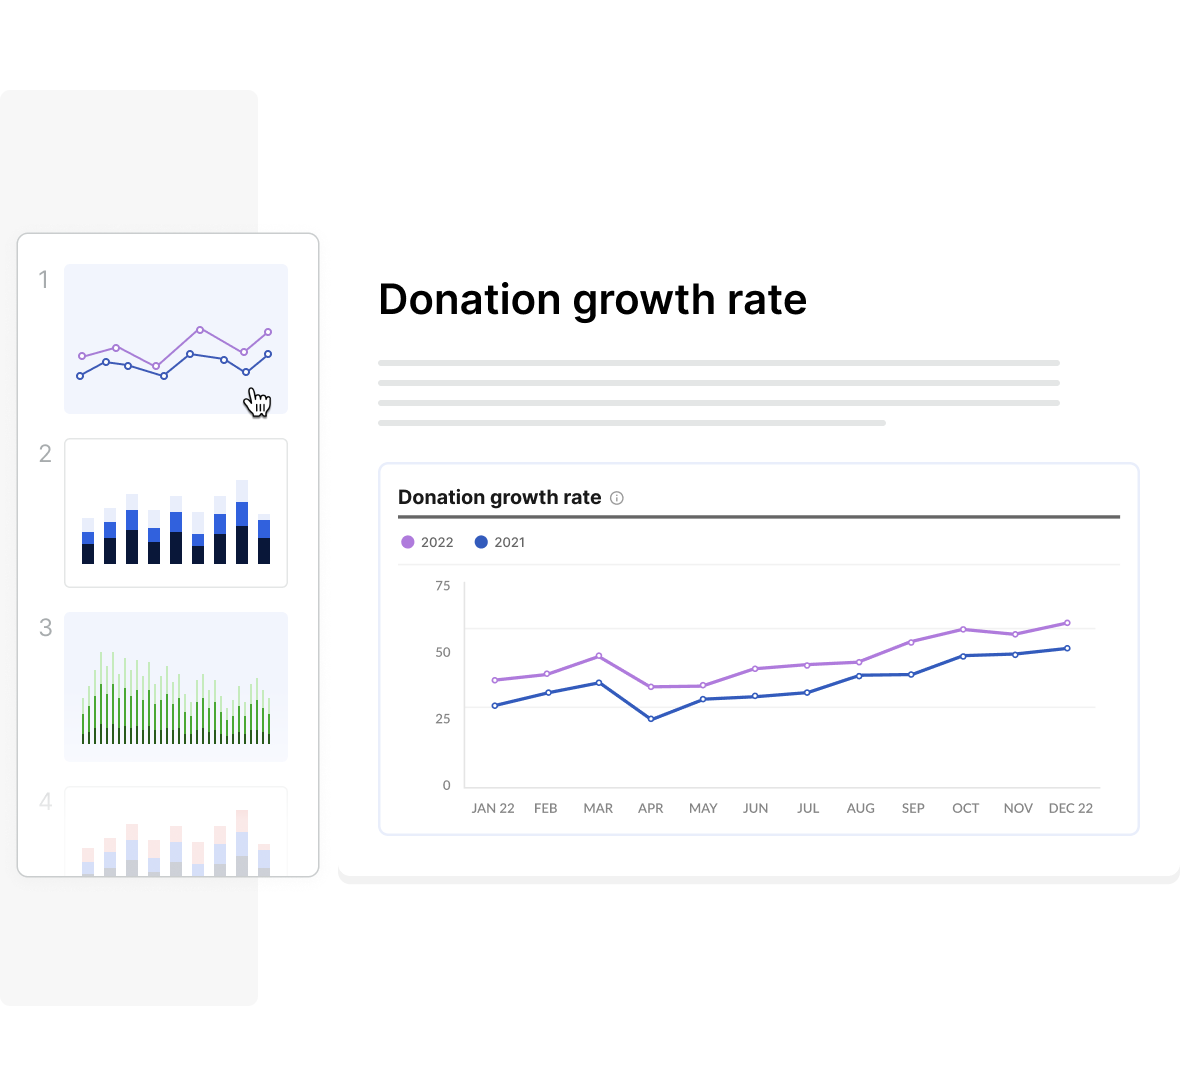 Donation growth rate